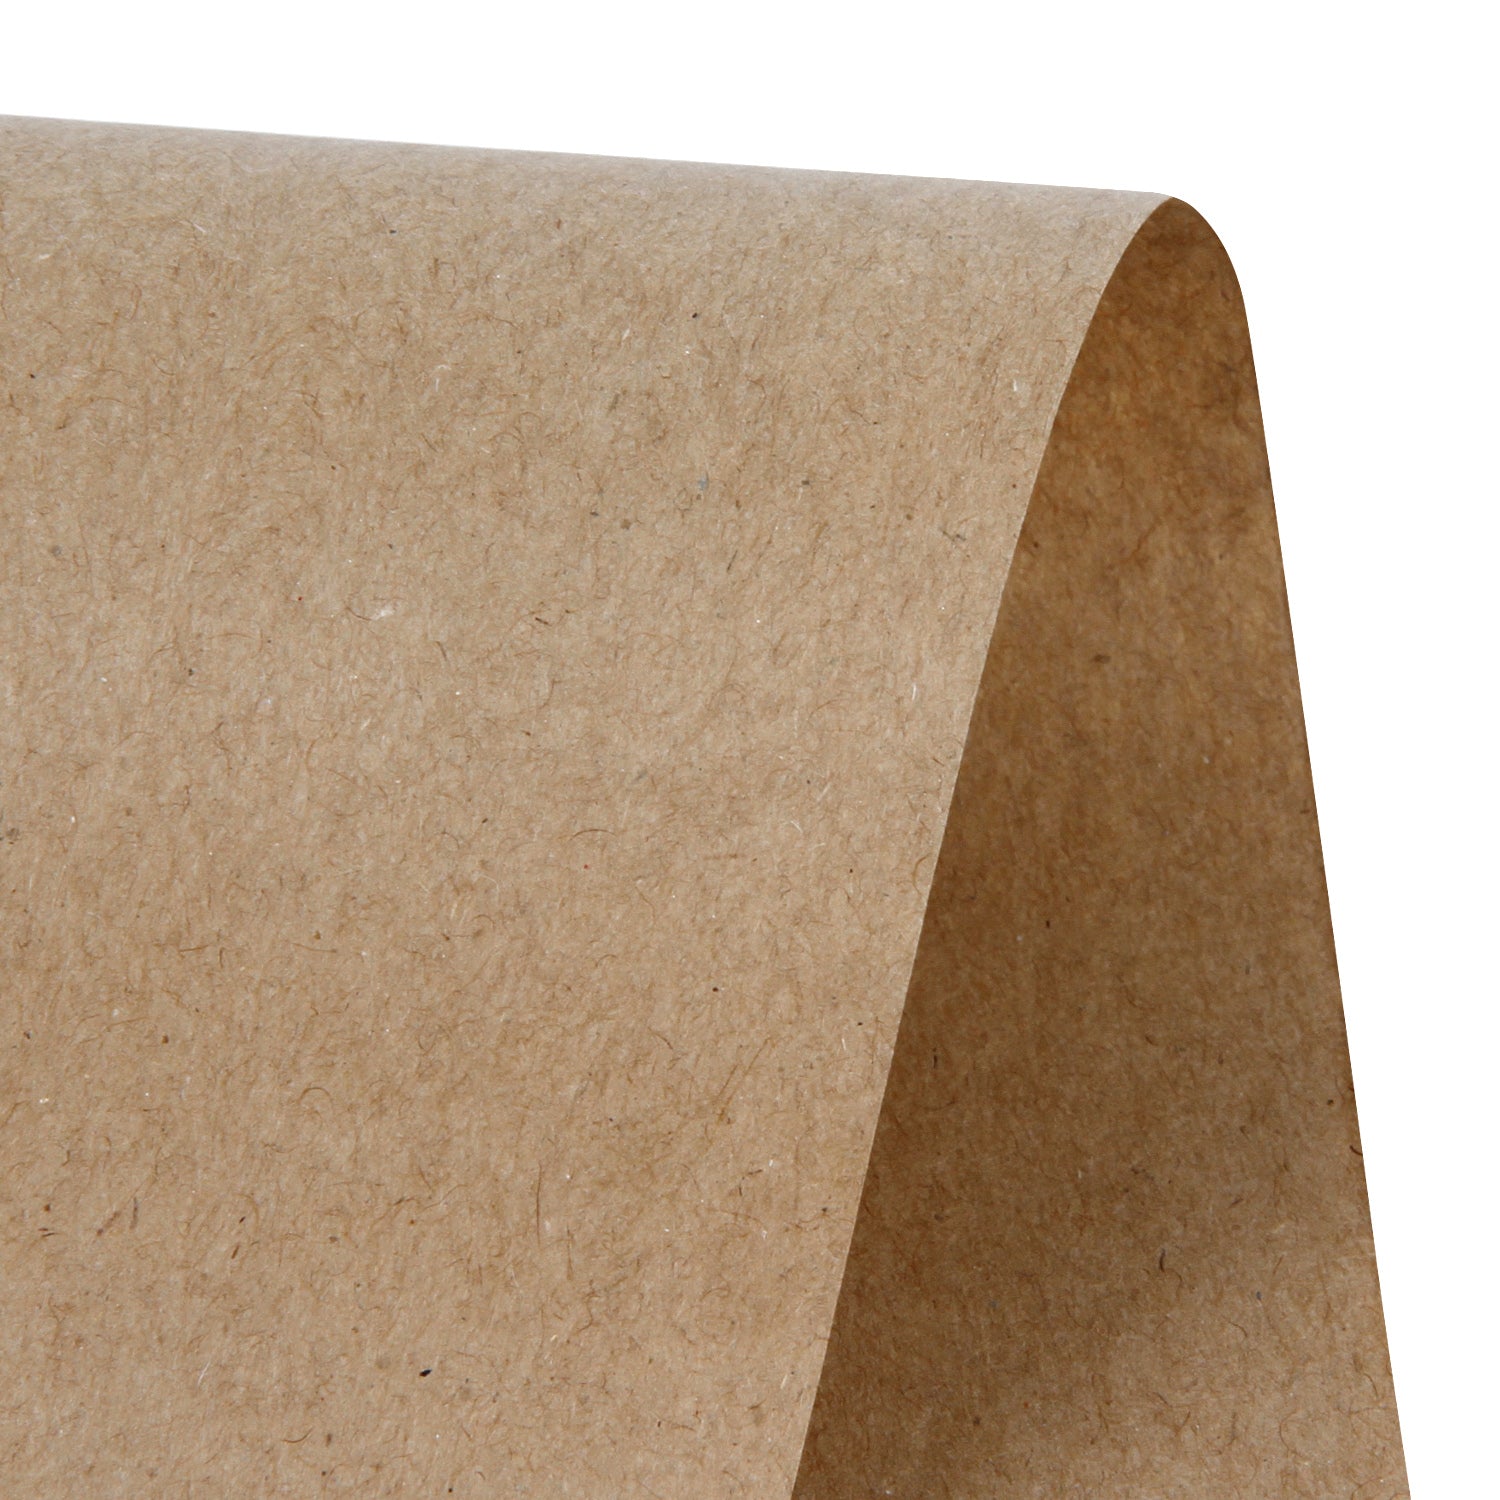 12 inch 40 lbs 900' Brown Kraft Paper Roll Shipping Wrapping Cushioning Void Fill